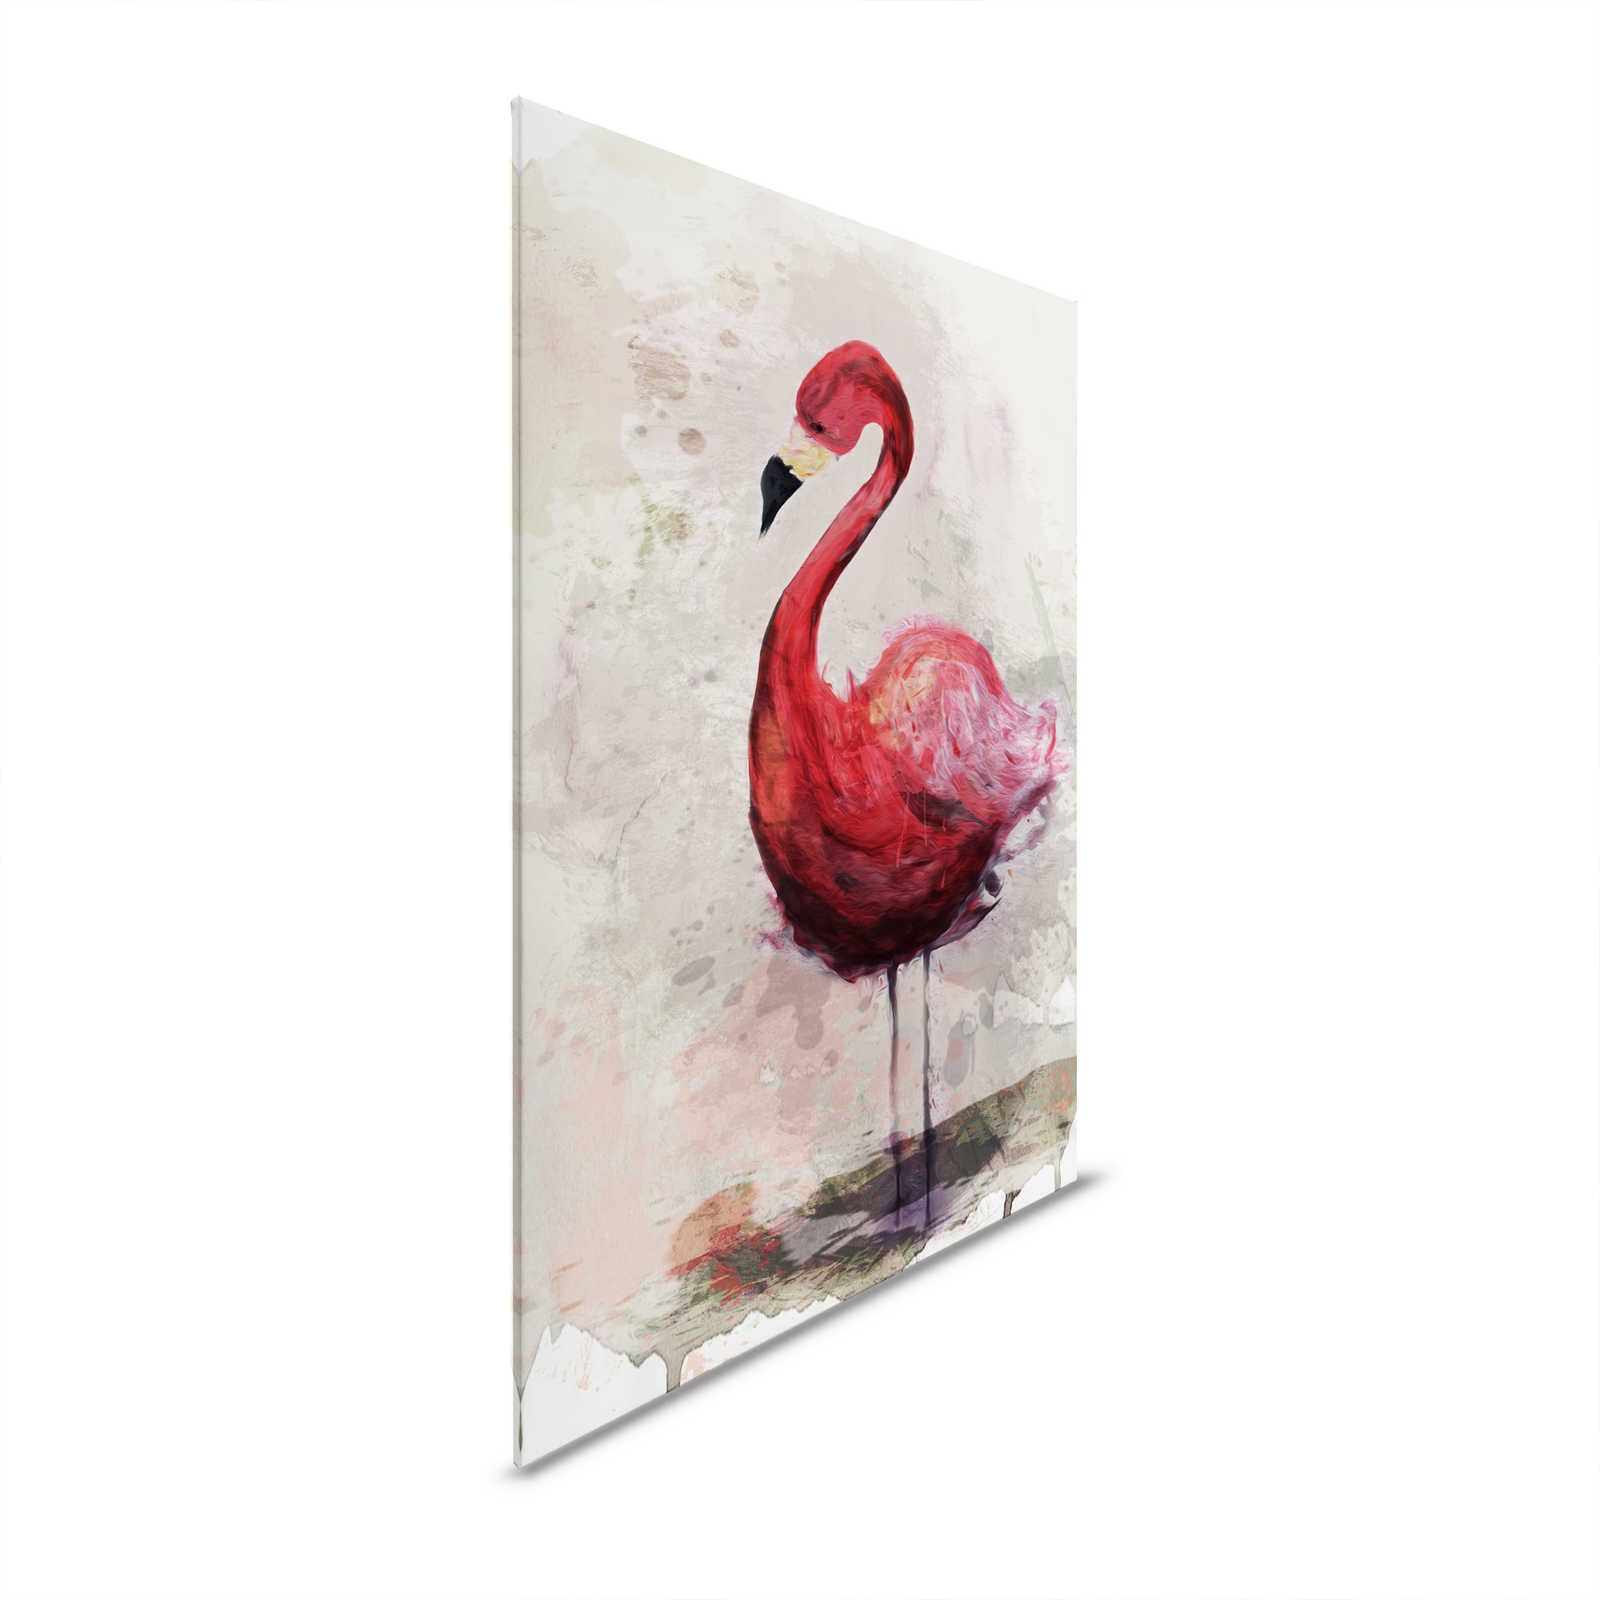         Watercolour Canvas Painting with Flamingo Motif in Drawing Style - 0.90 m x 0.60 m
    